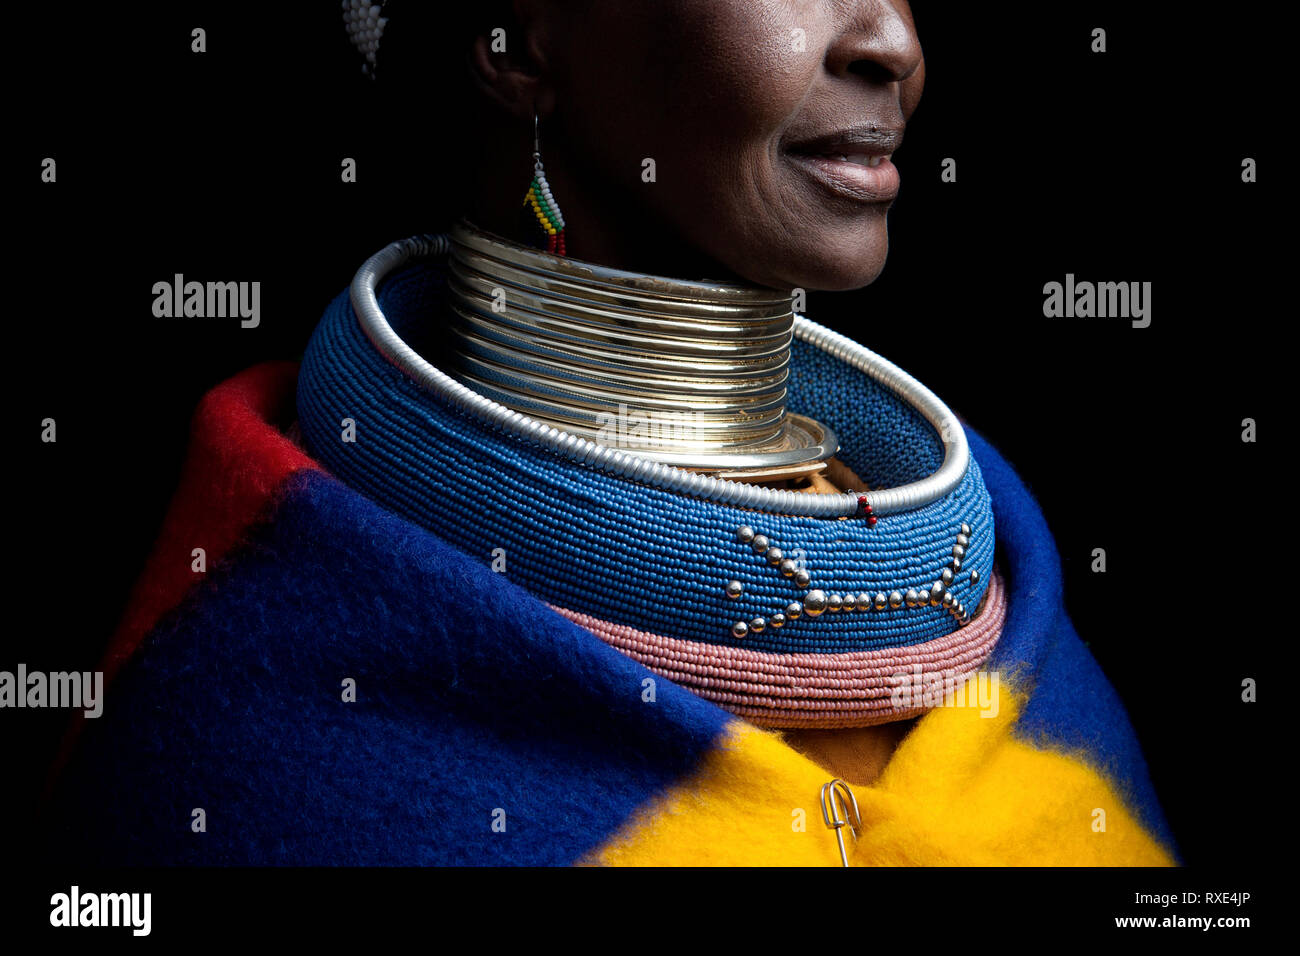 An Ndebele woman in South Africa. Stock Photo